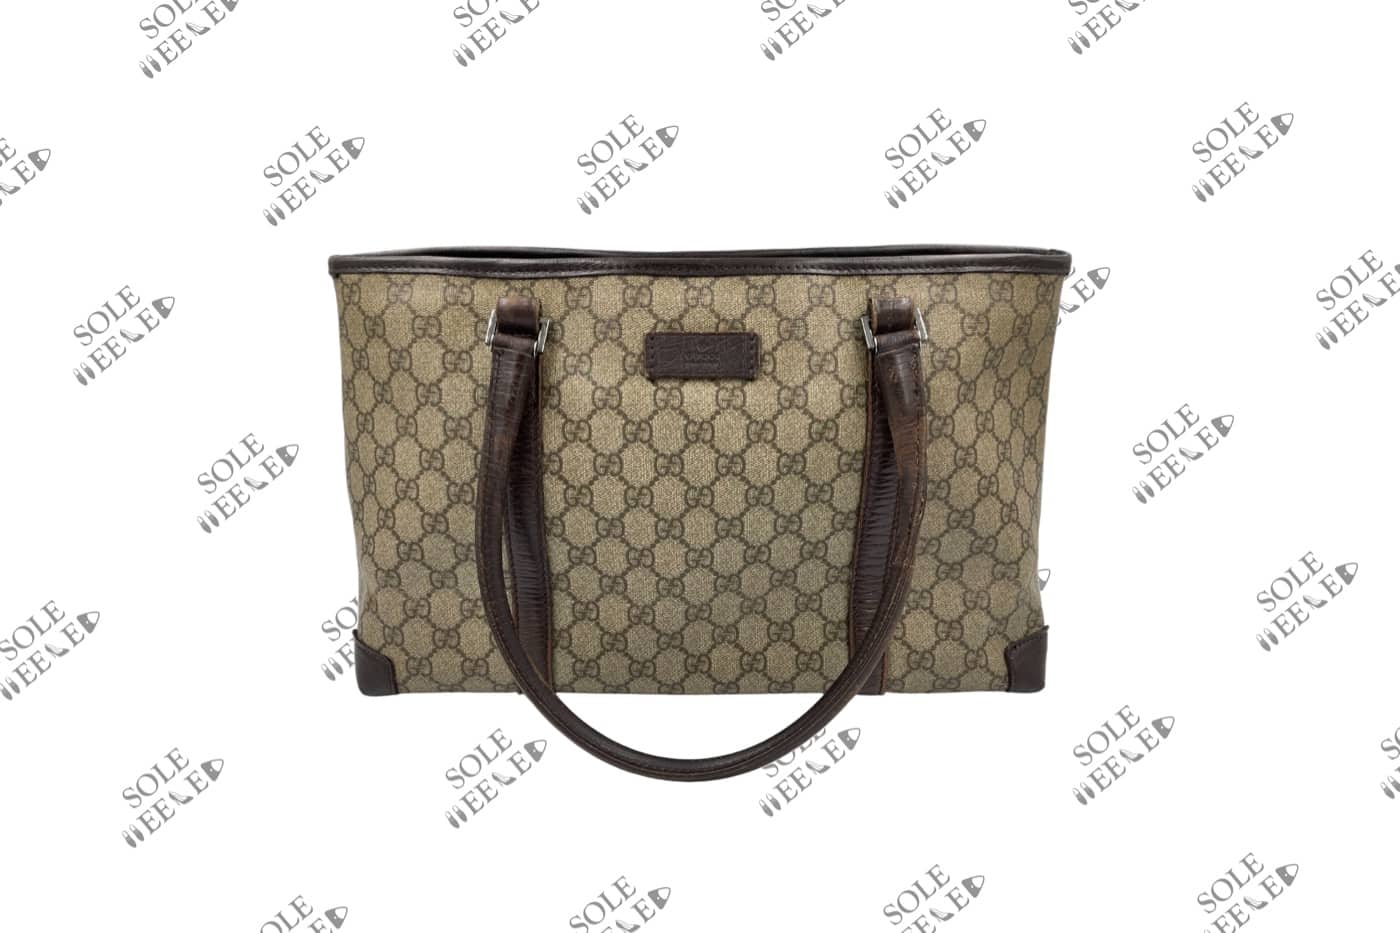 Gucci Bag Corner Protection and Binding Replacement